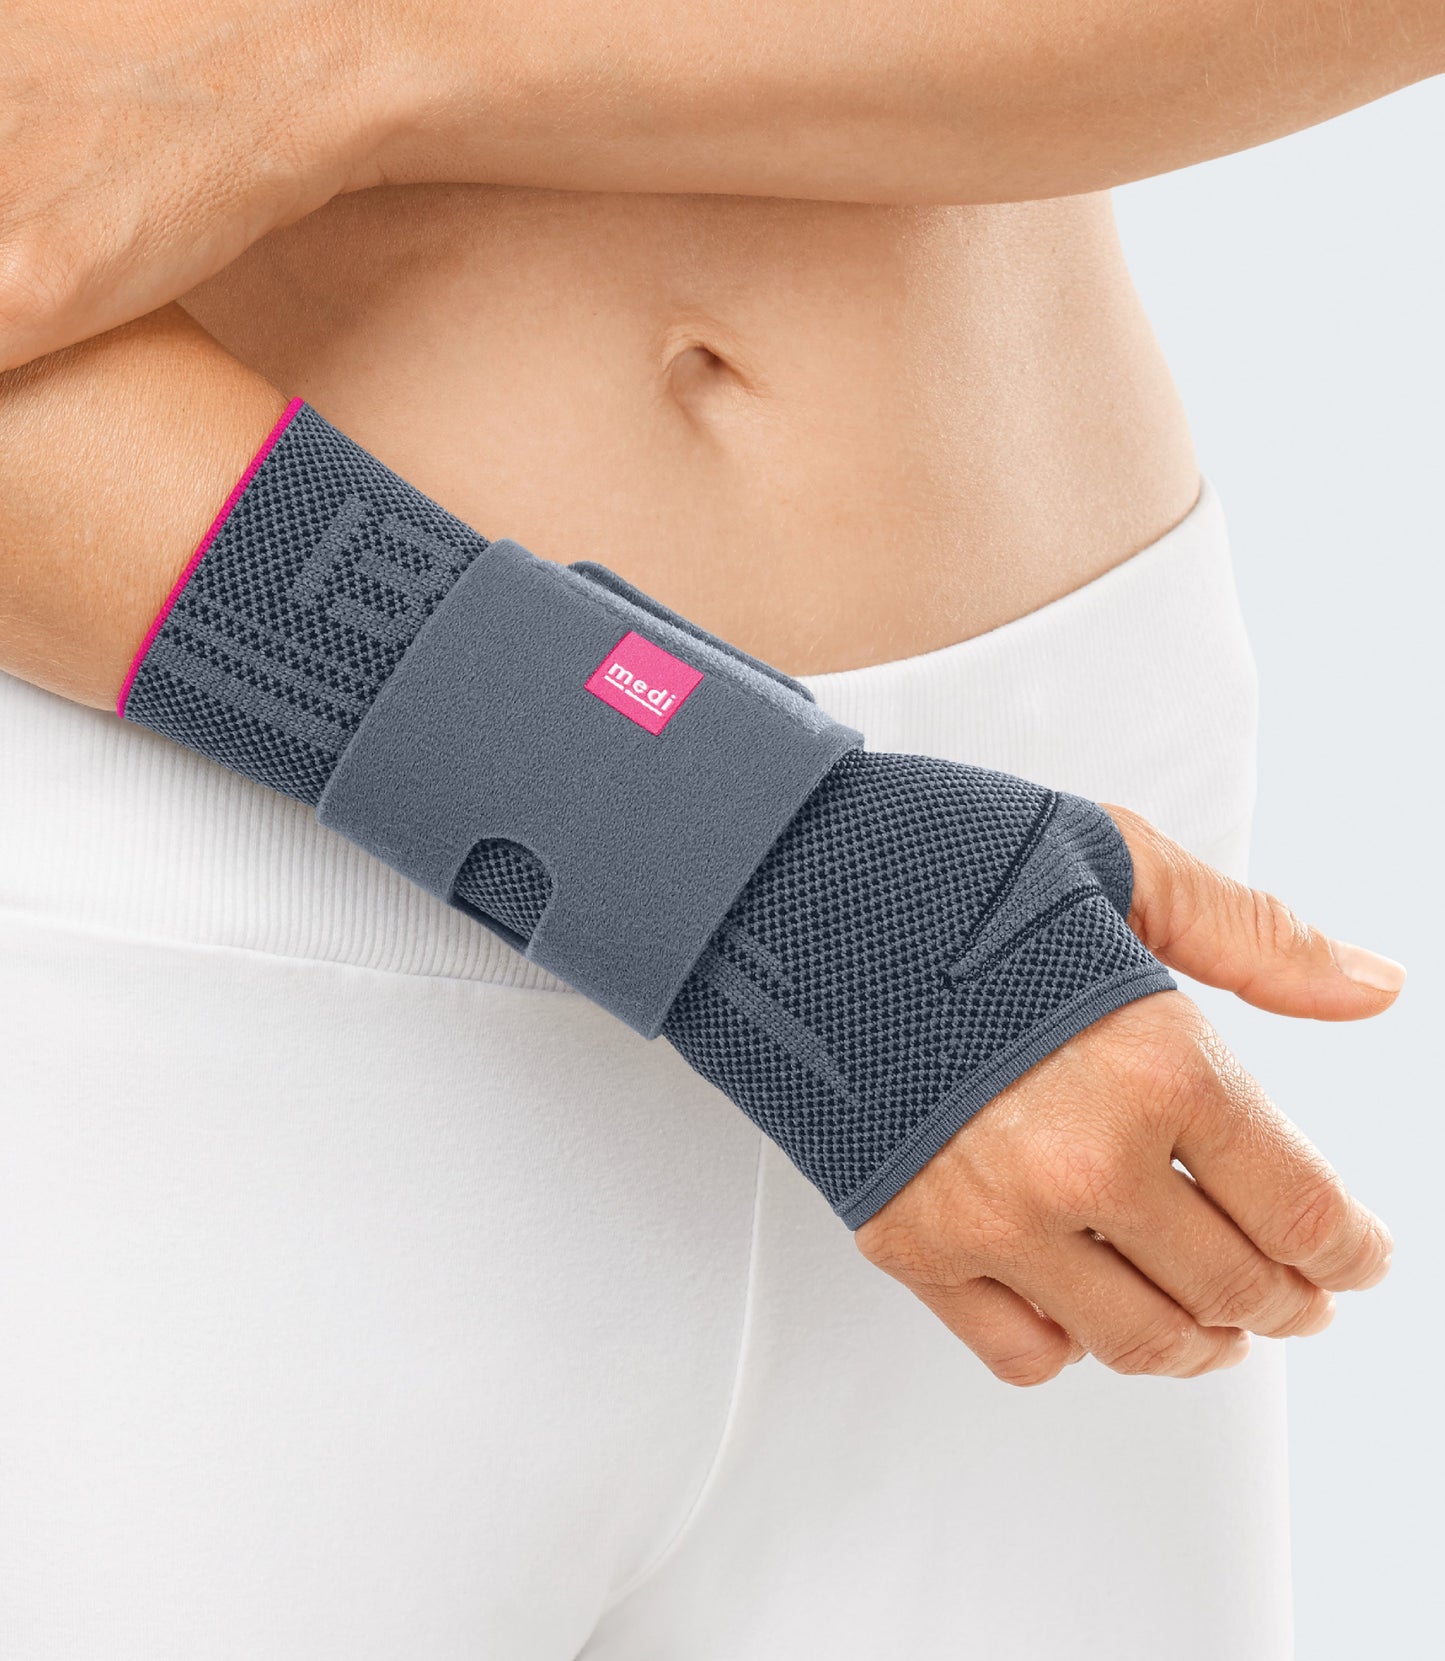 Manumed active Wrist Support, Silver